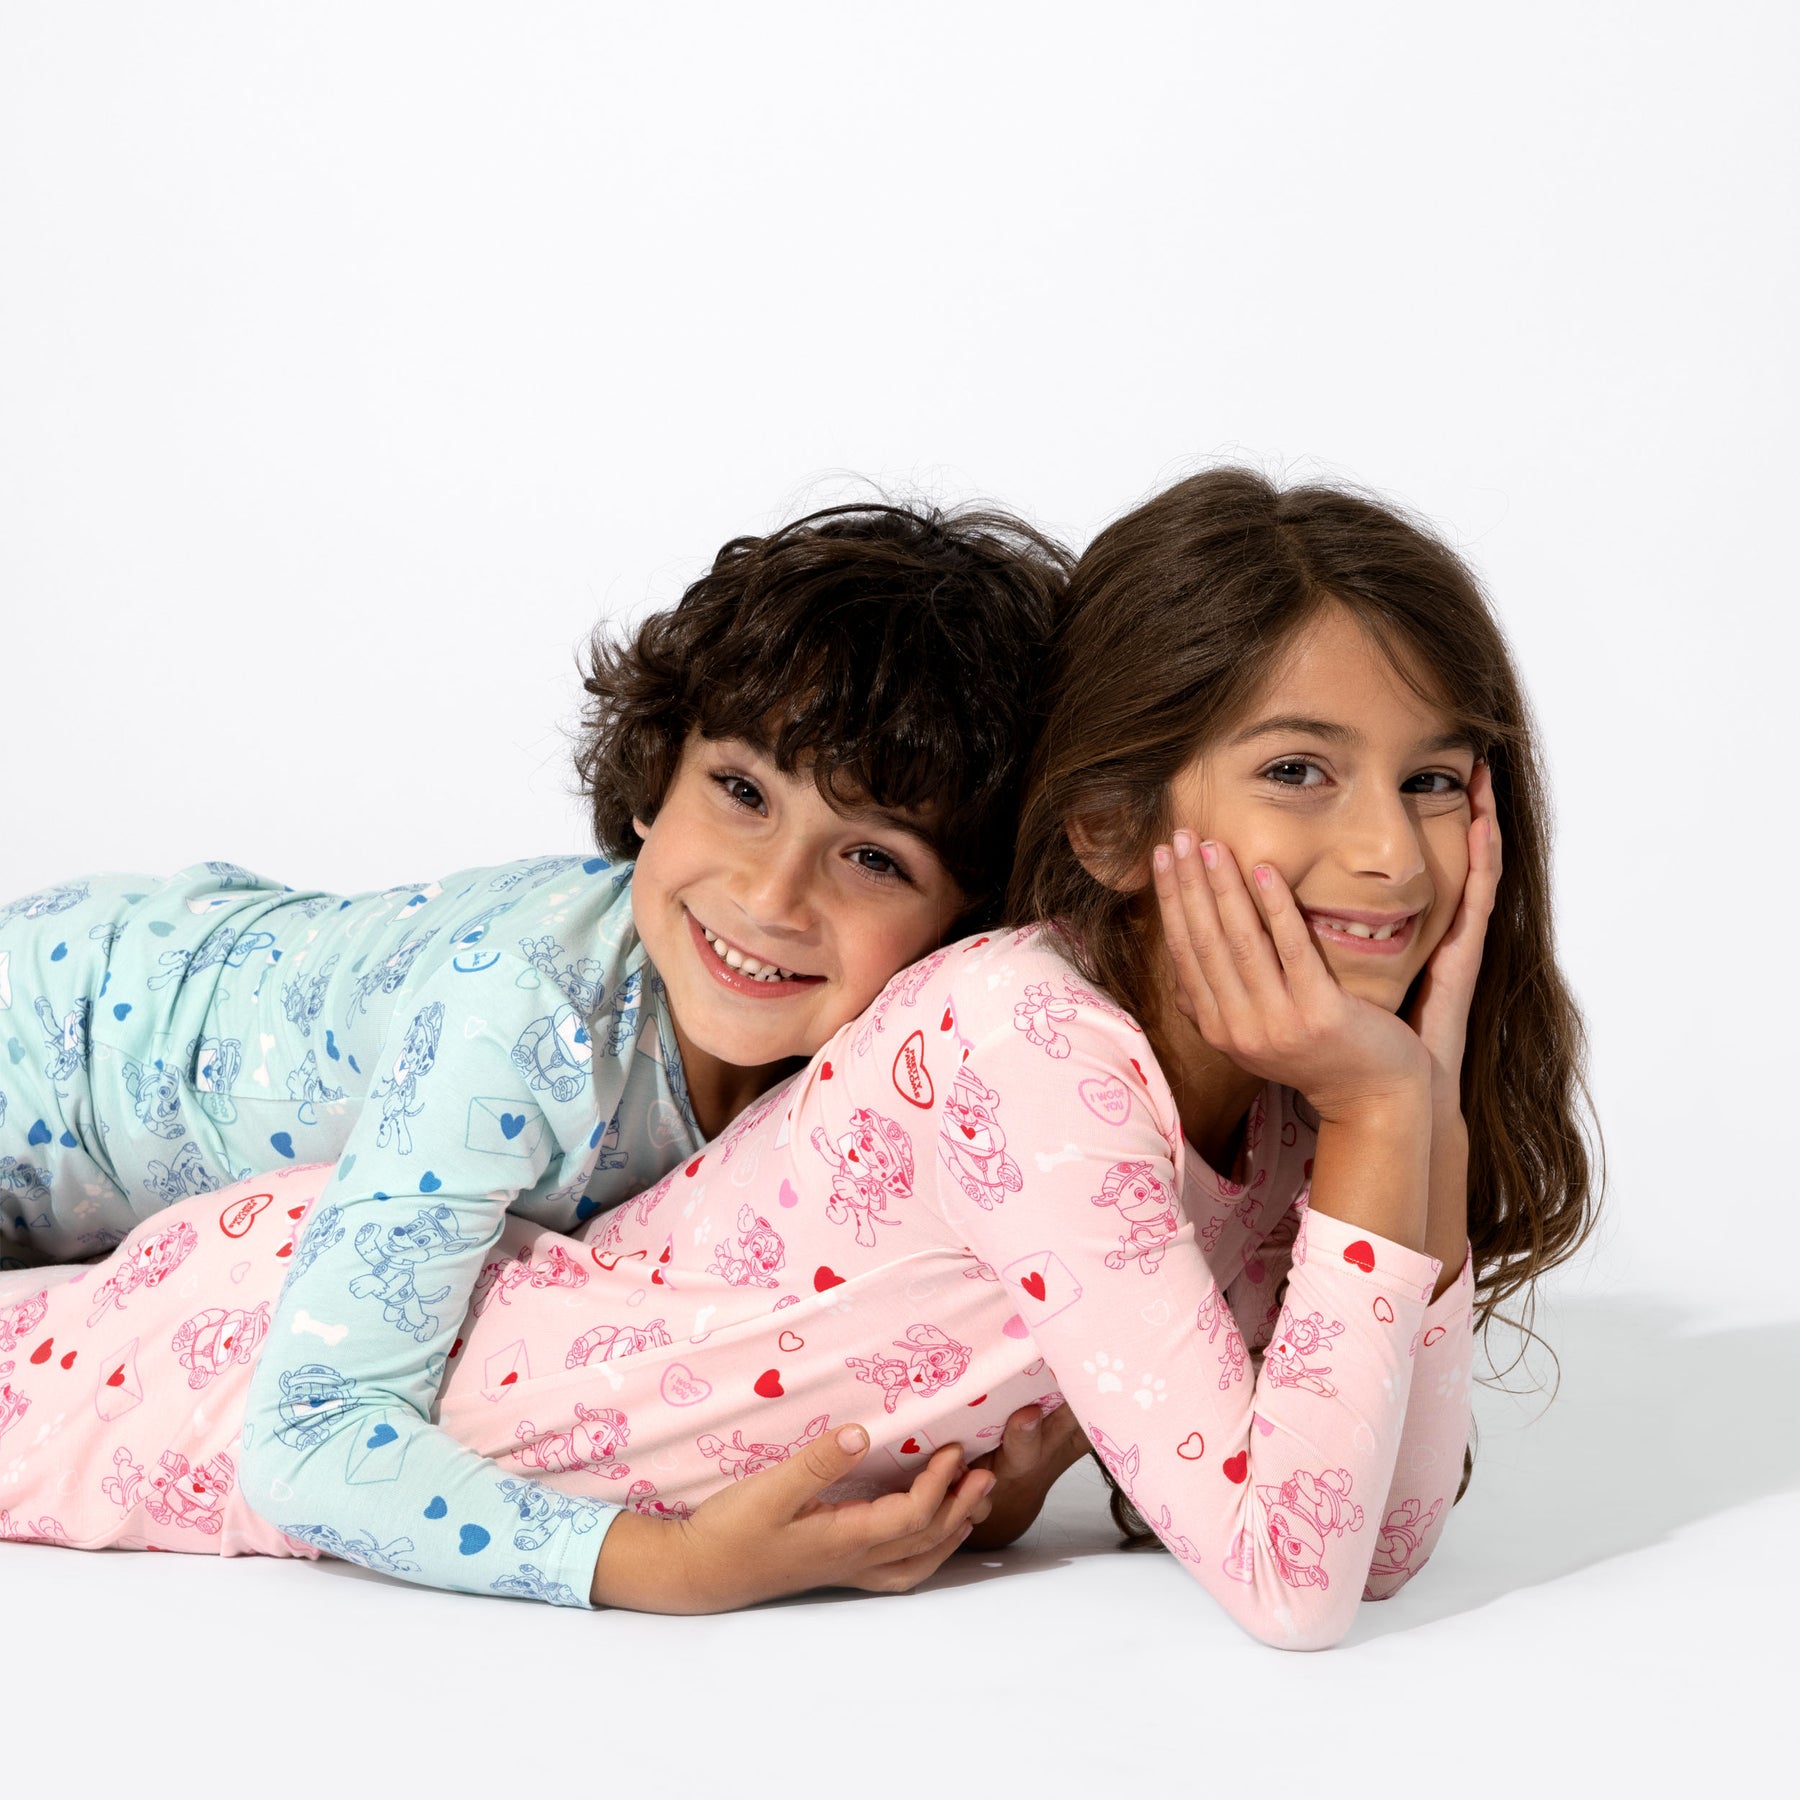 Paws-itively Adorable: PAW Patrol Valentines Bamboo Kids Pajamas